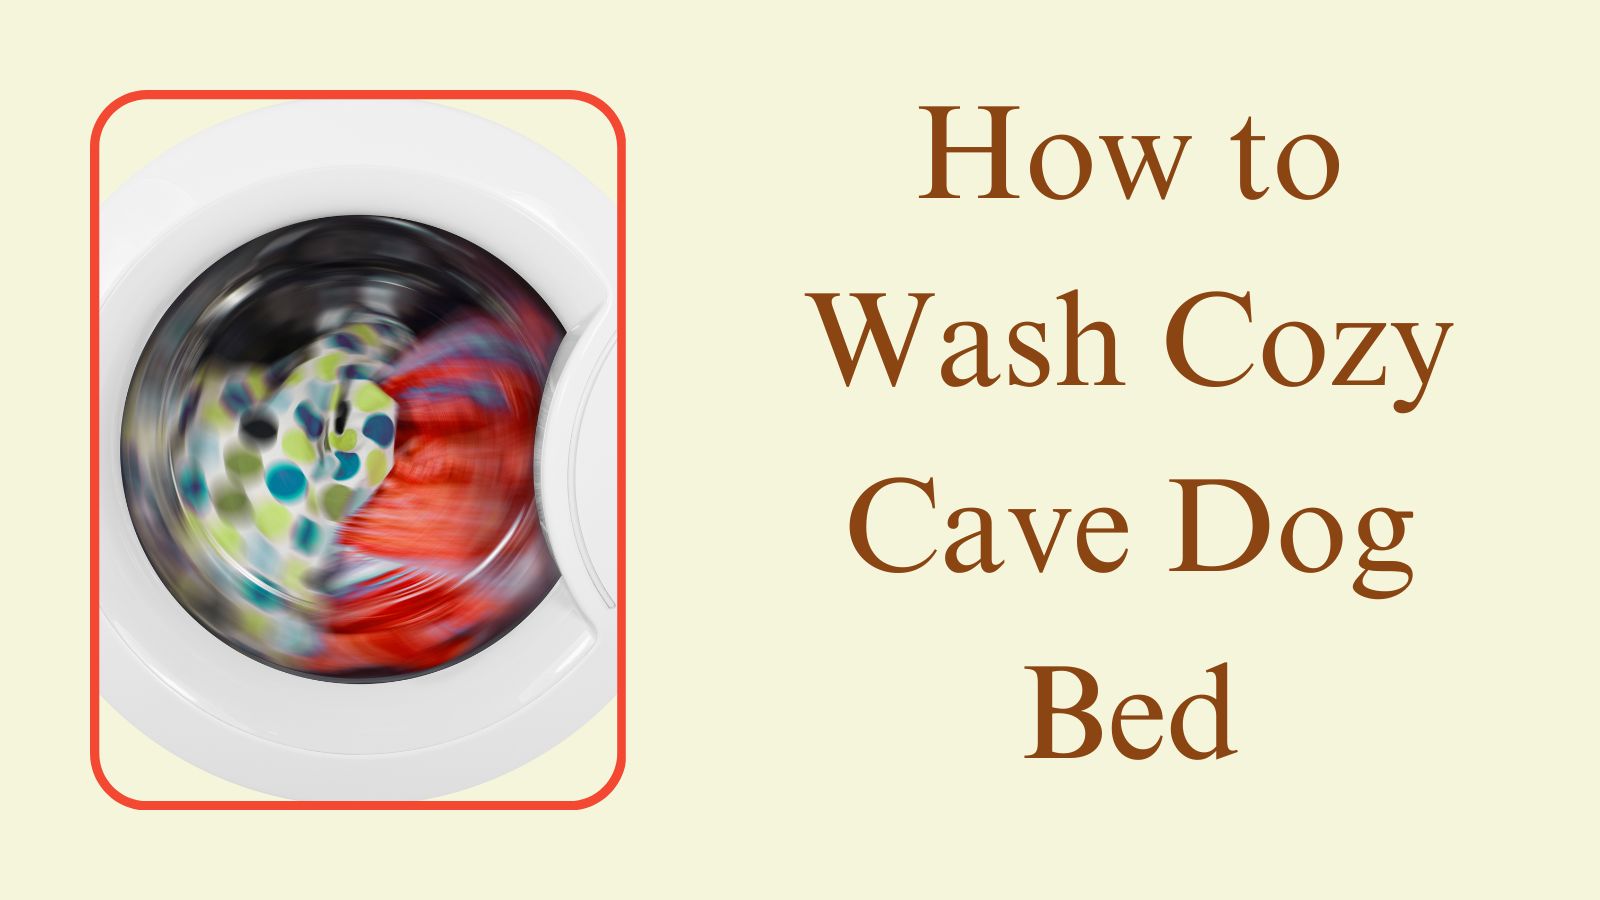 How to Wash Cozy Cave Dog Bed